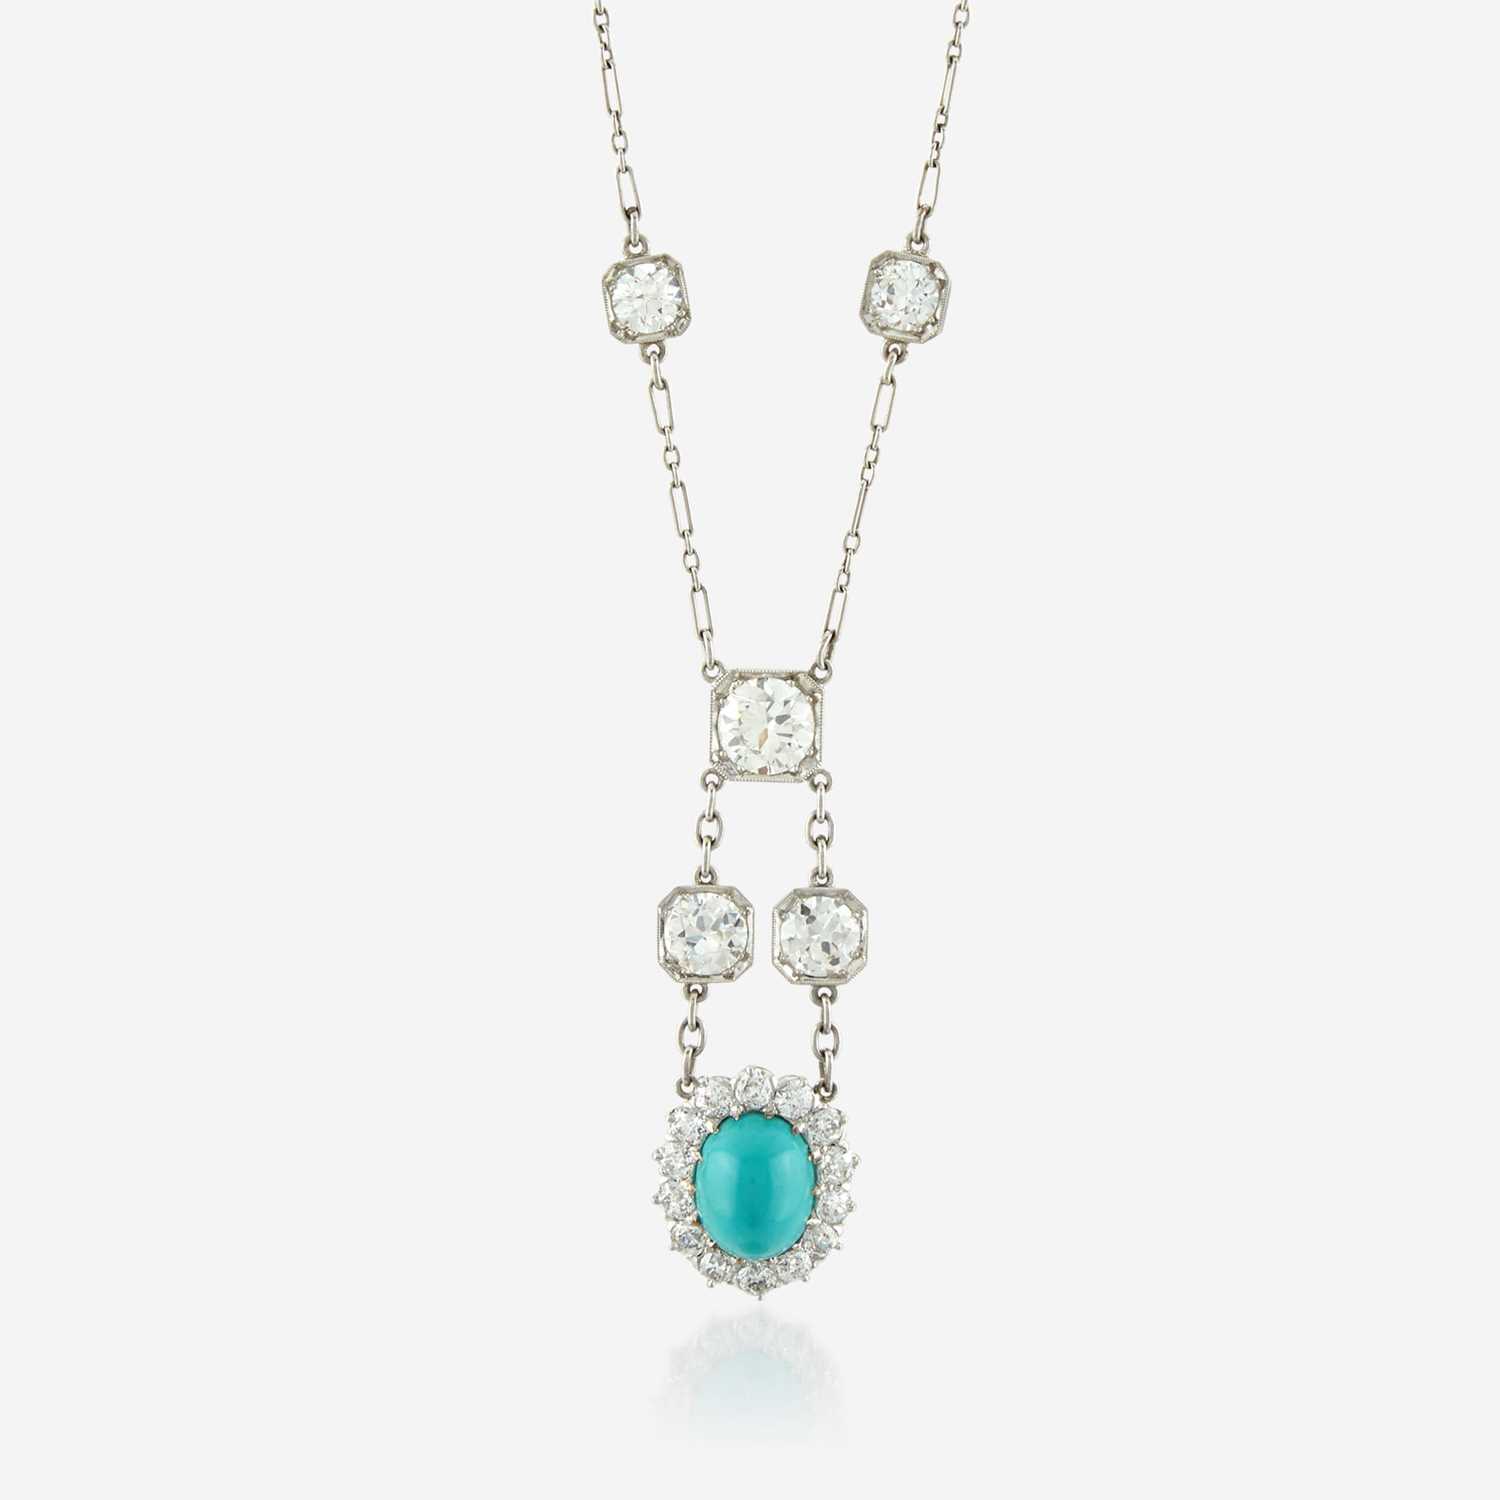 Lot 51 - An Art Deco turquoise, diamond, and platinum necklace